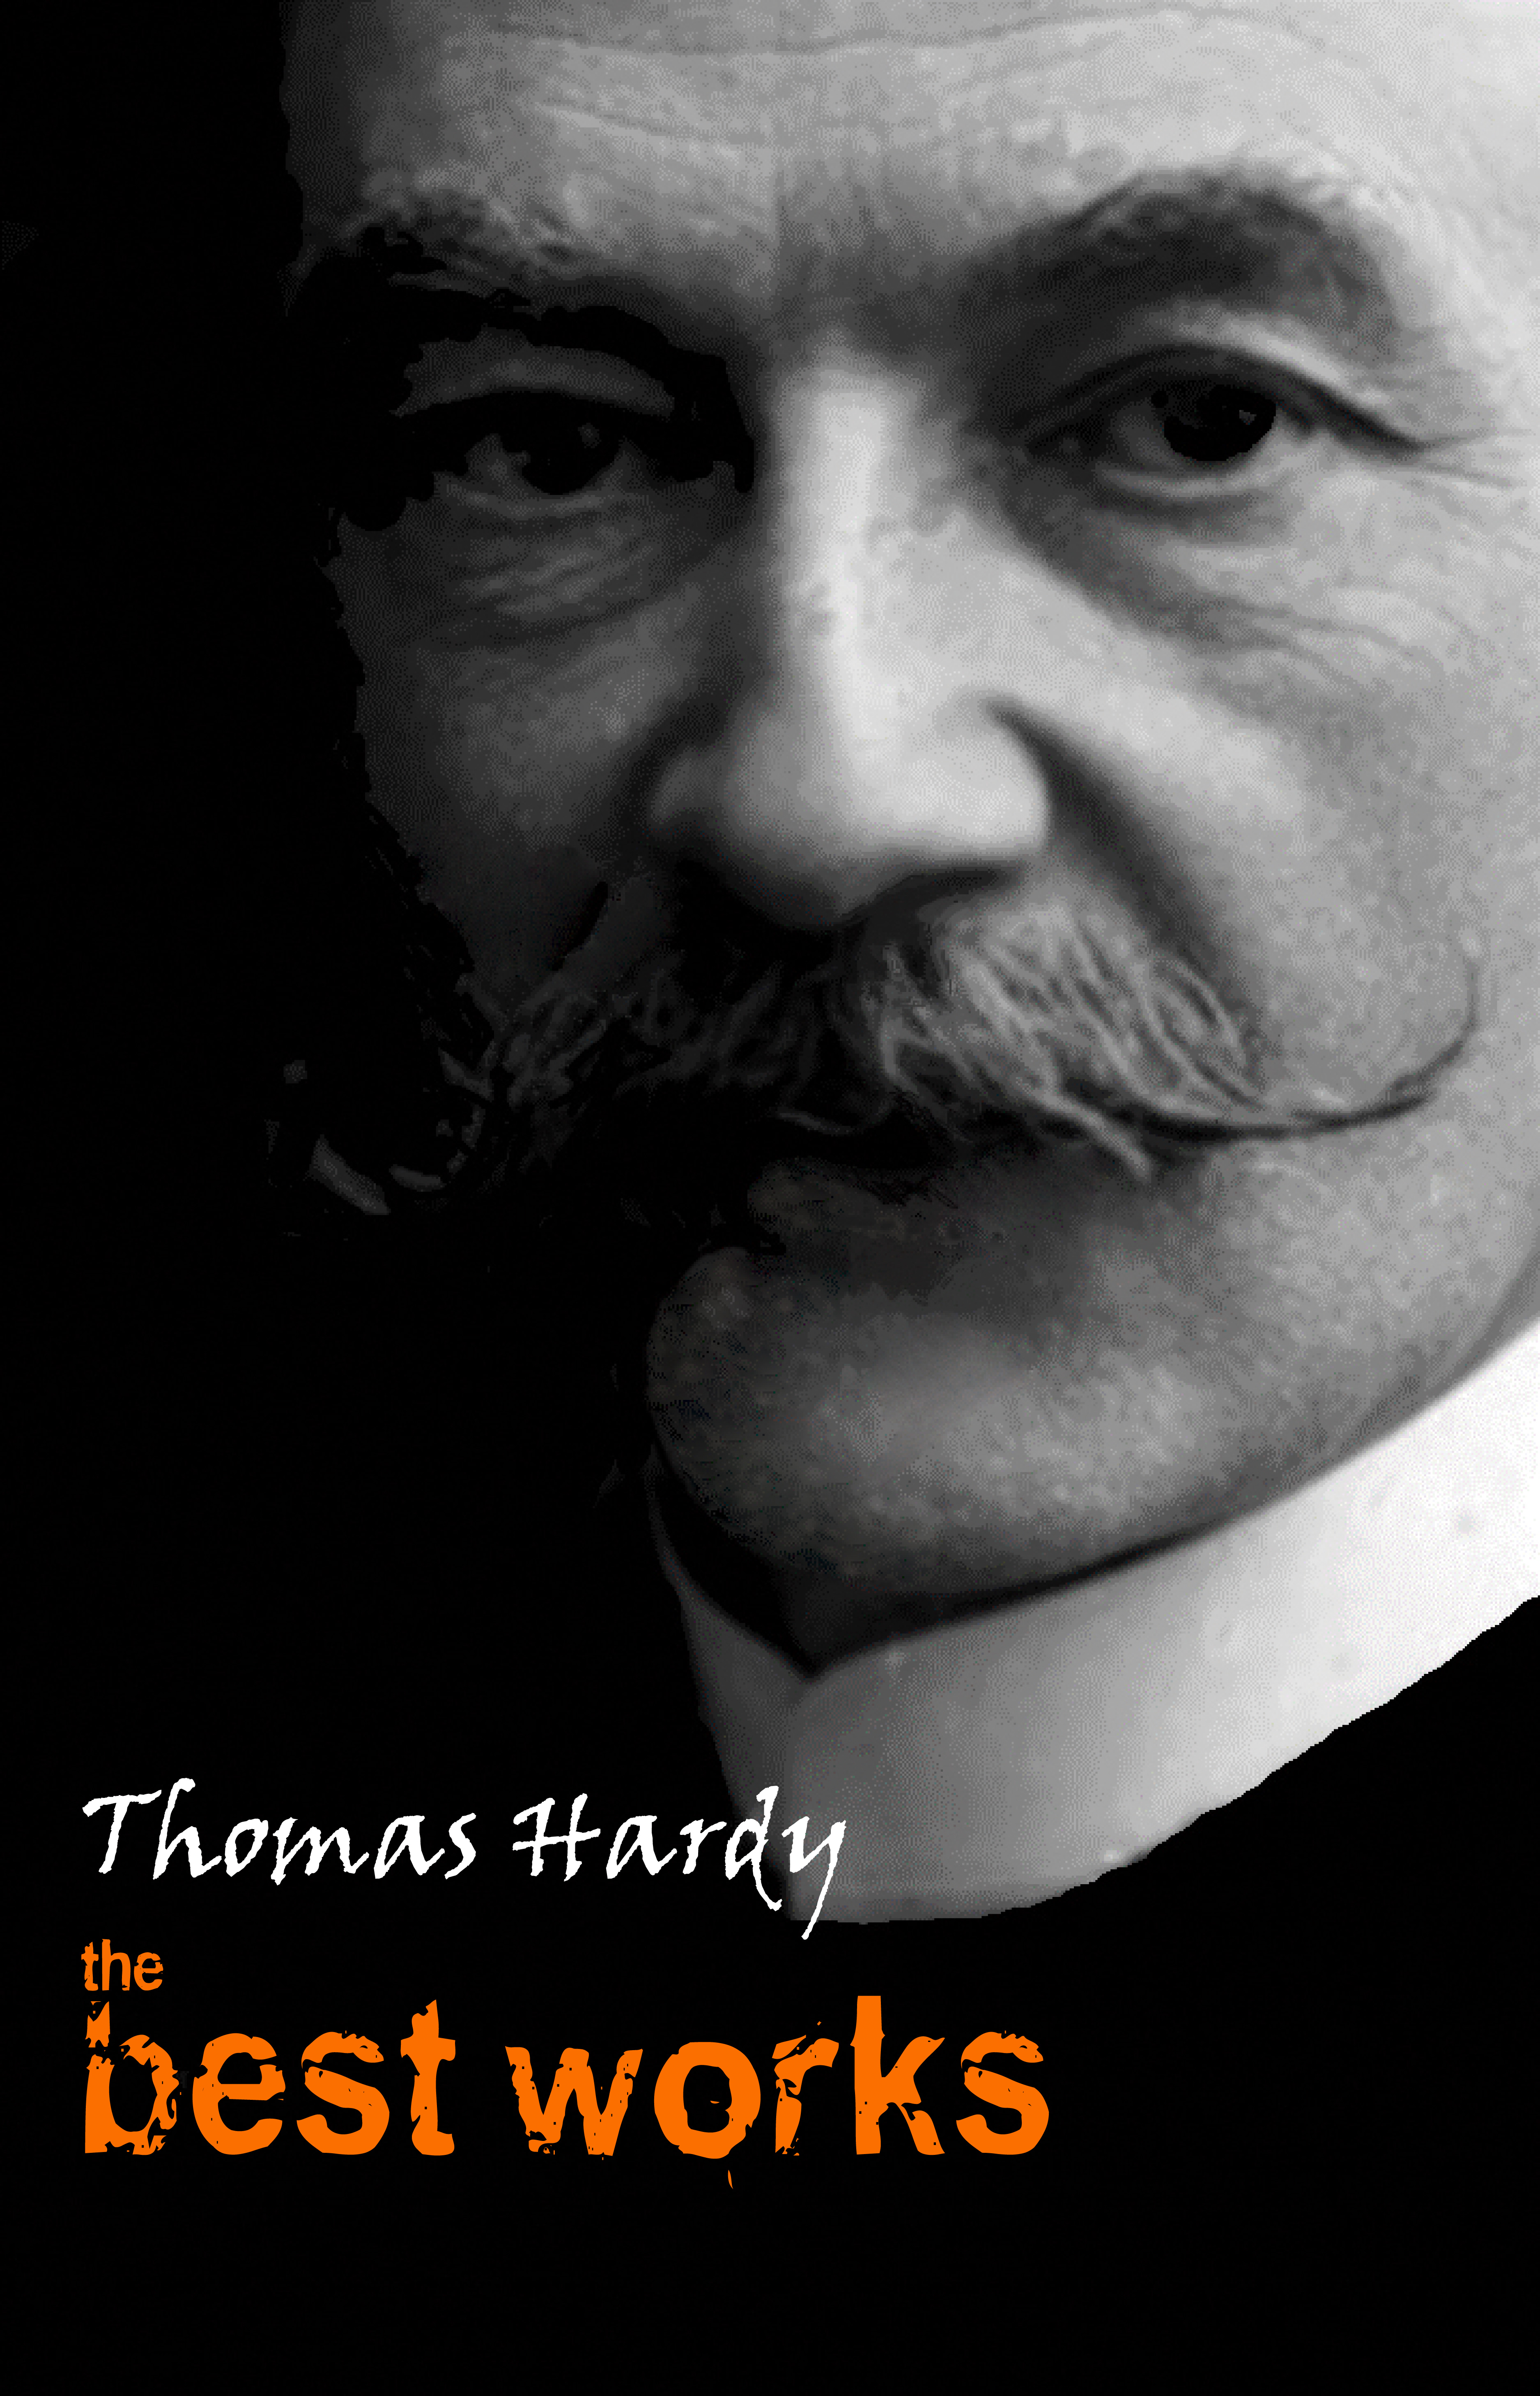 Thomas Hardy: The Best Works